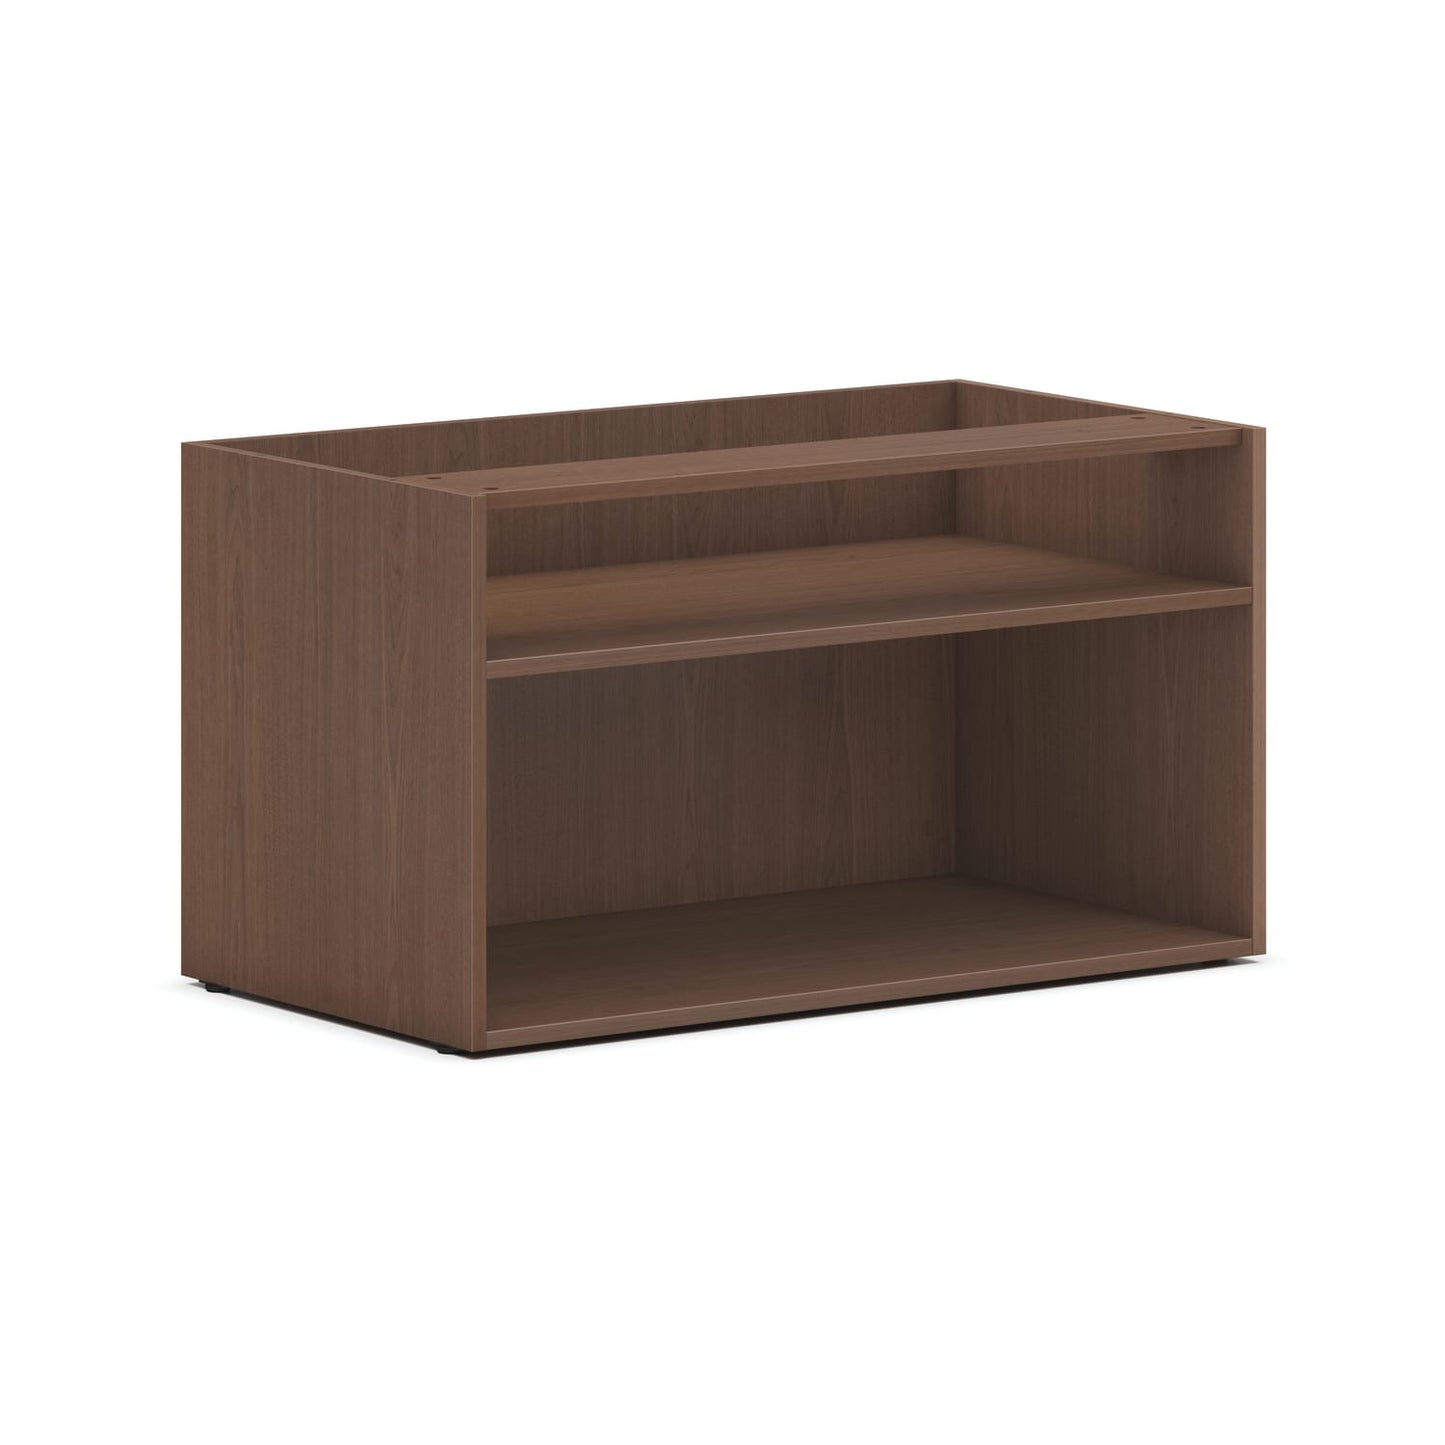 HON Mod Low Open Storage Credenza | Without Top | 36"W | Sepia Walnut Finish